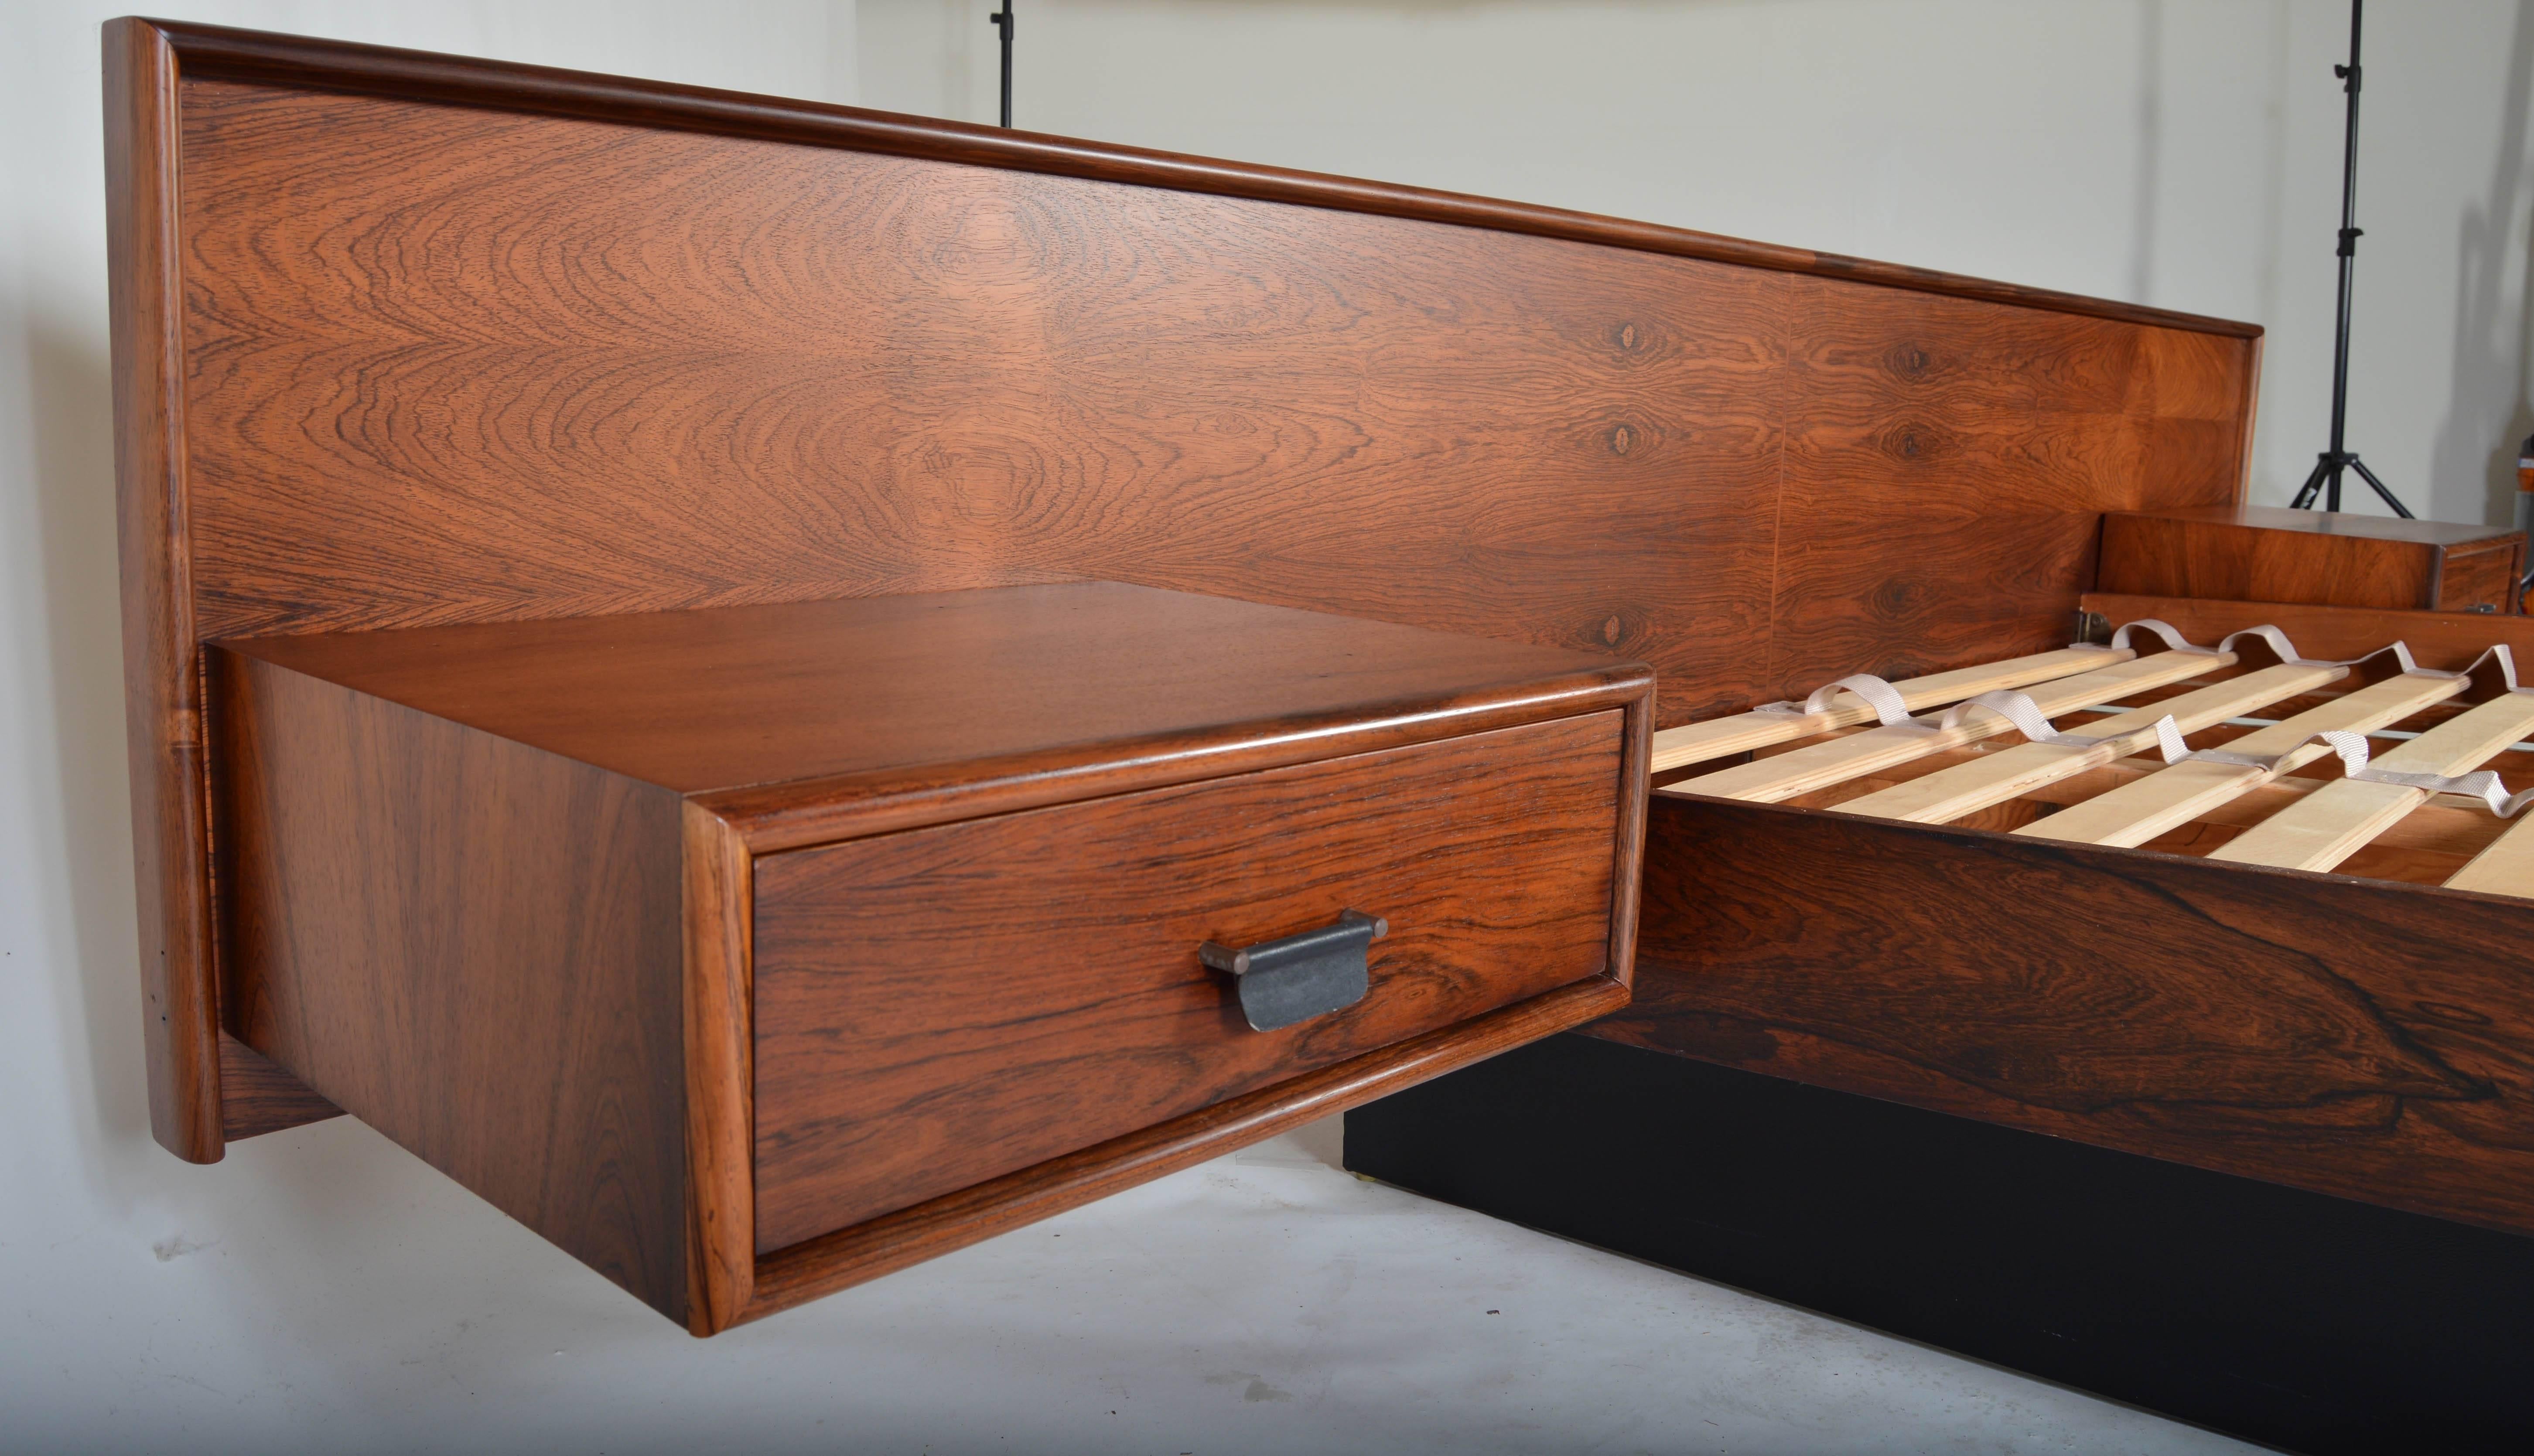 An absolutely stunning rosewood queen size bed in the manner of Hans Wegner having floating nightstands with leather pulls for the drawers. 

Dimensions: Headboard height 26